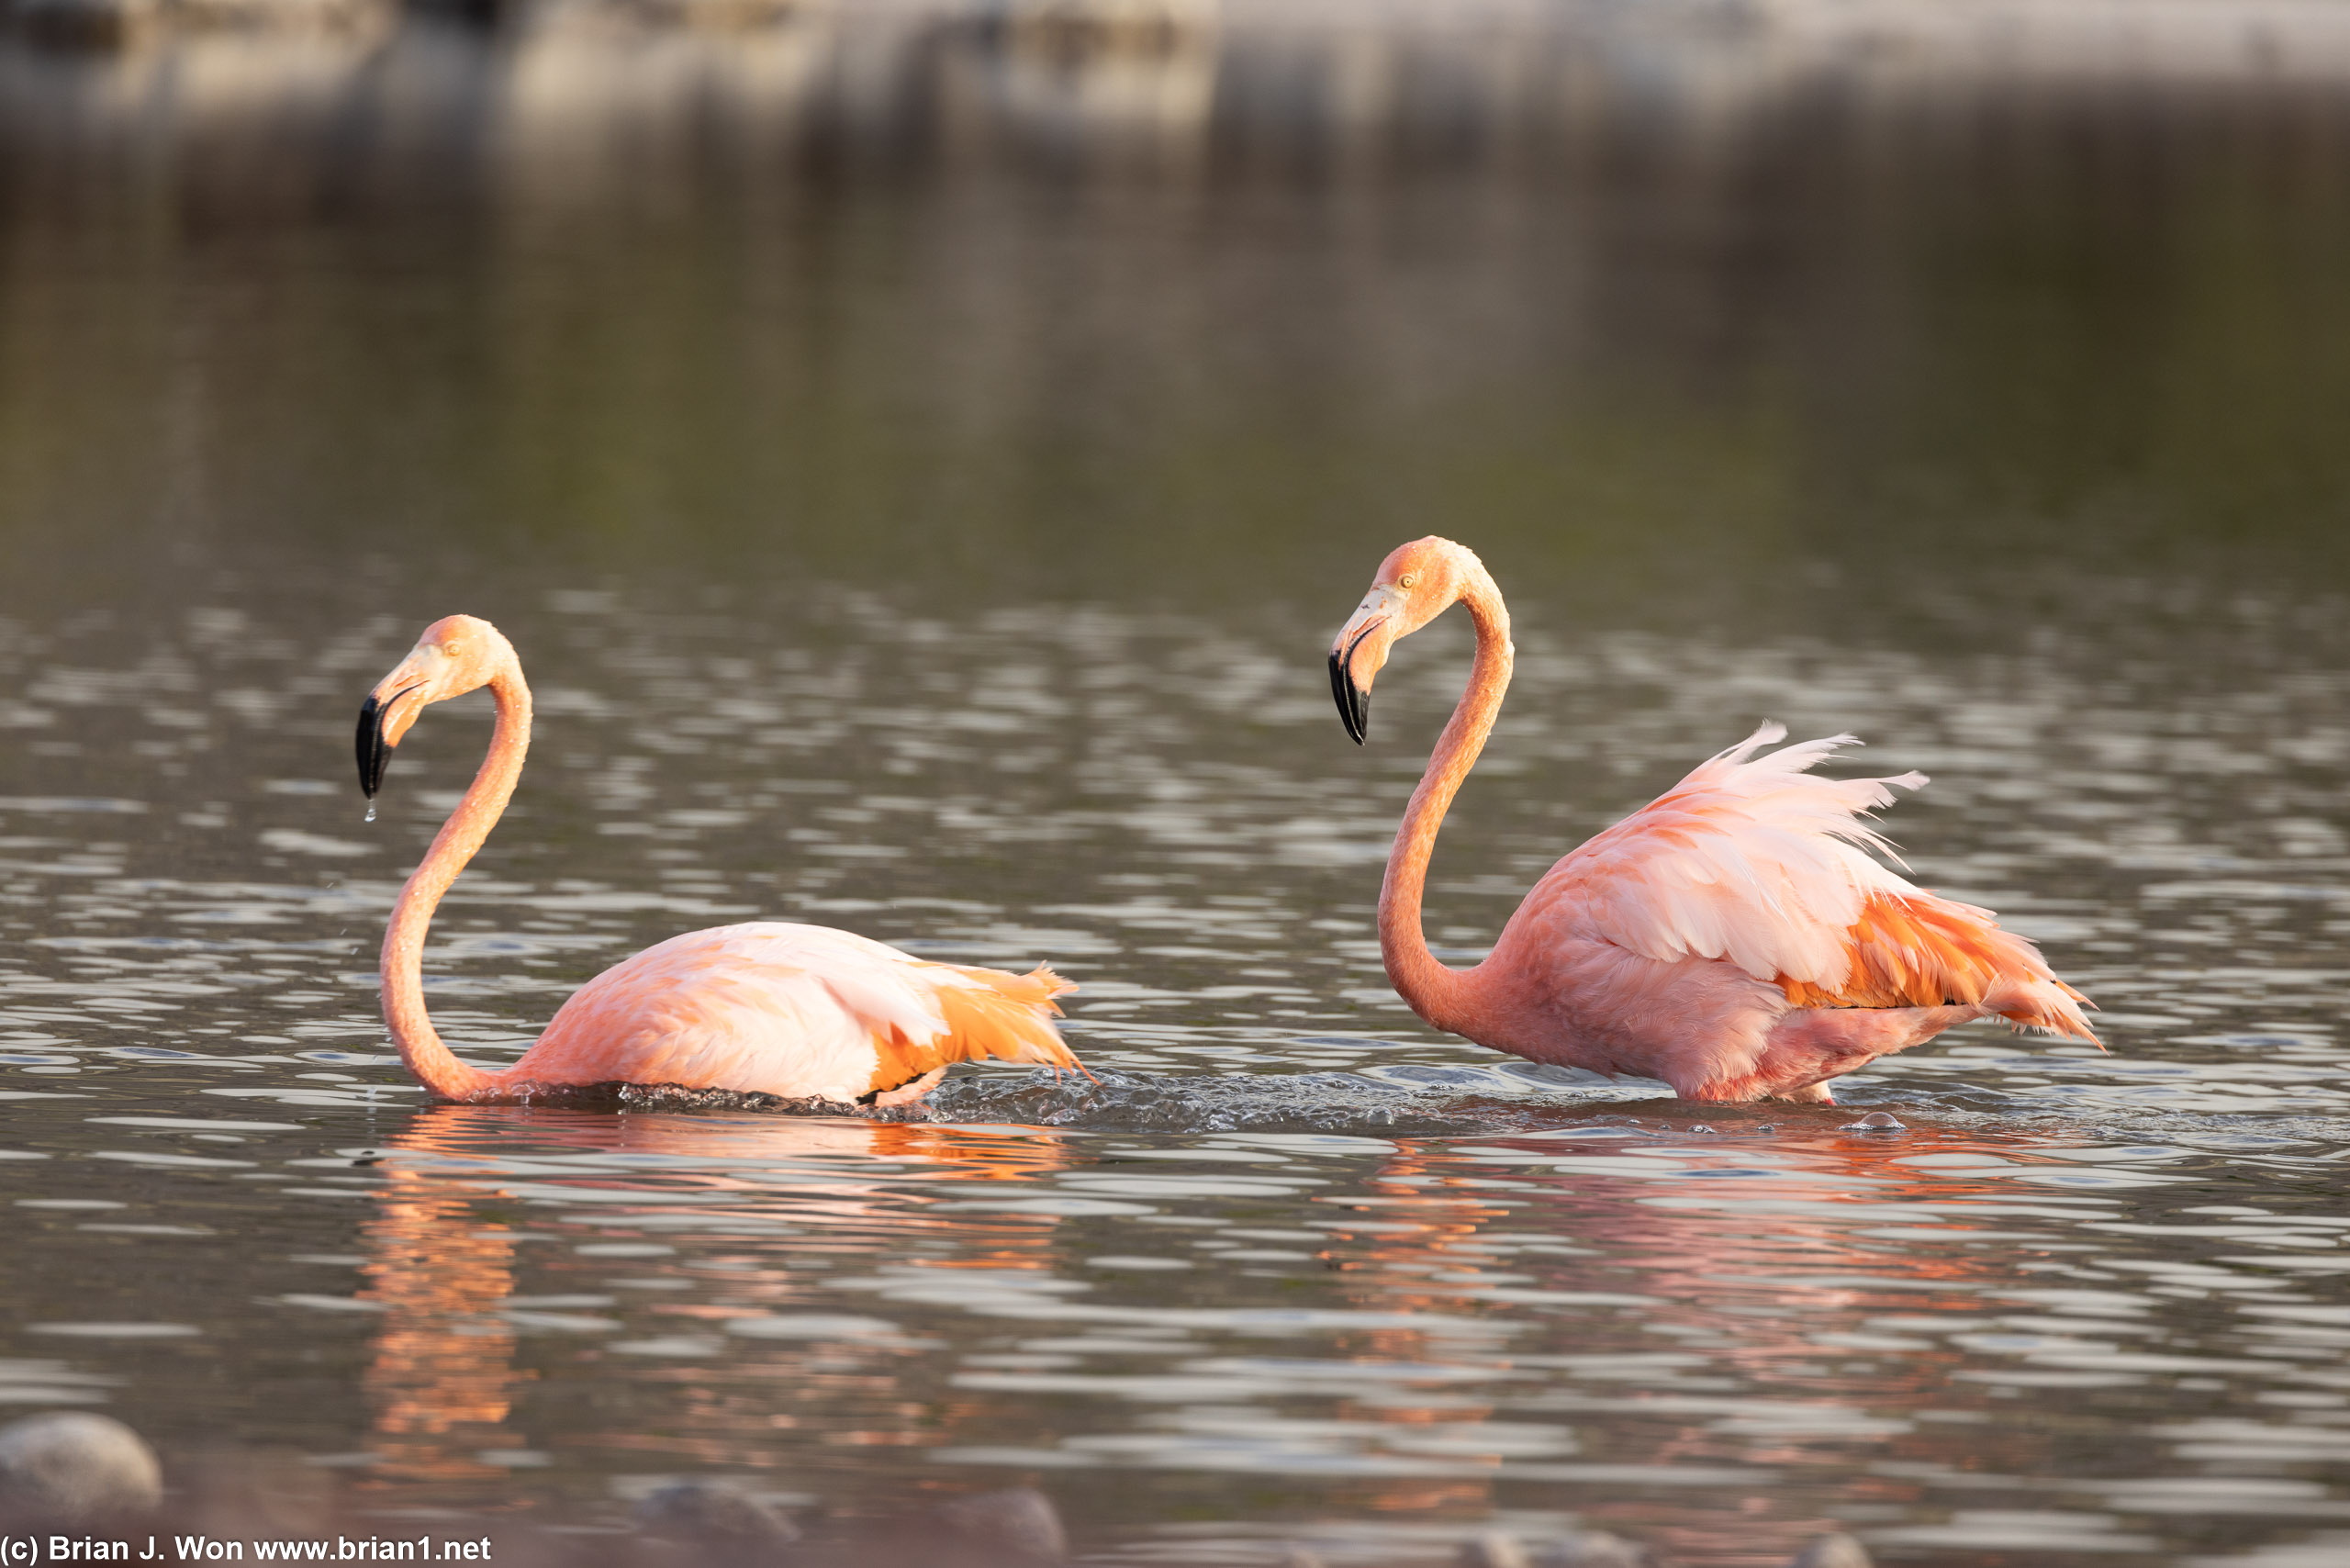 Fighting-- the flamingo on the left is about to flee..